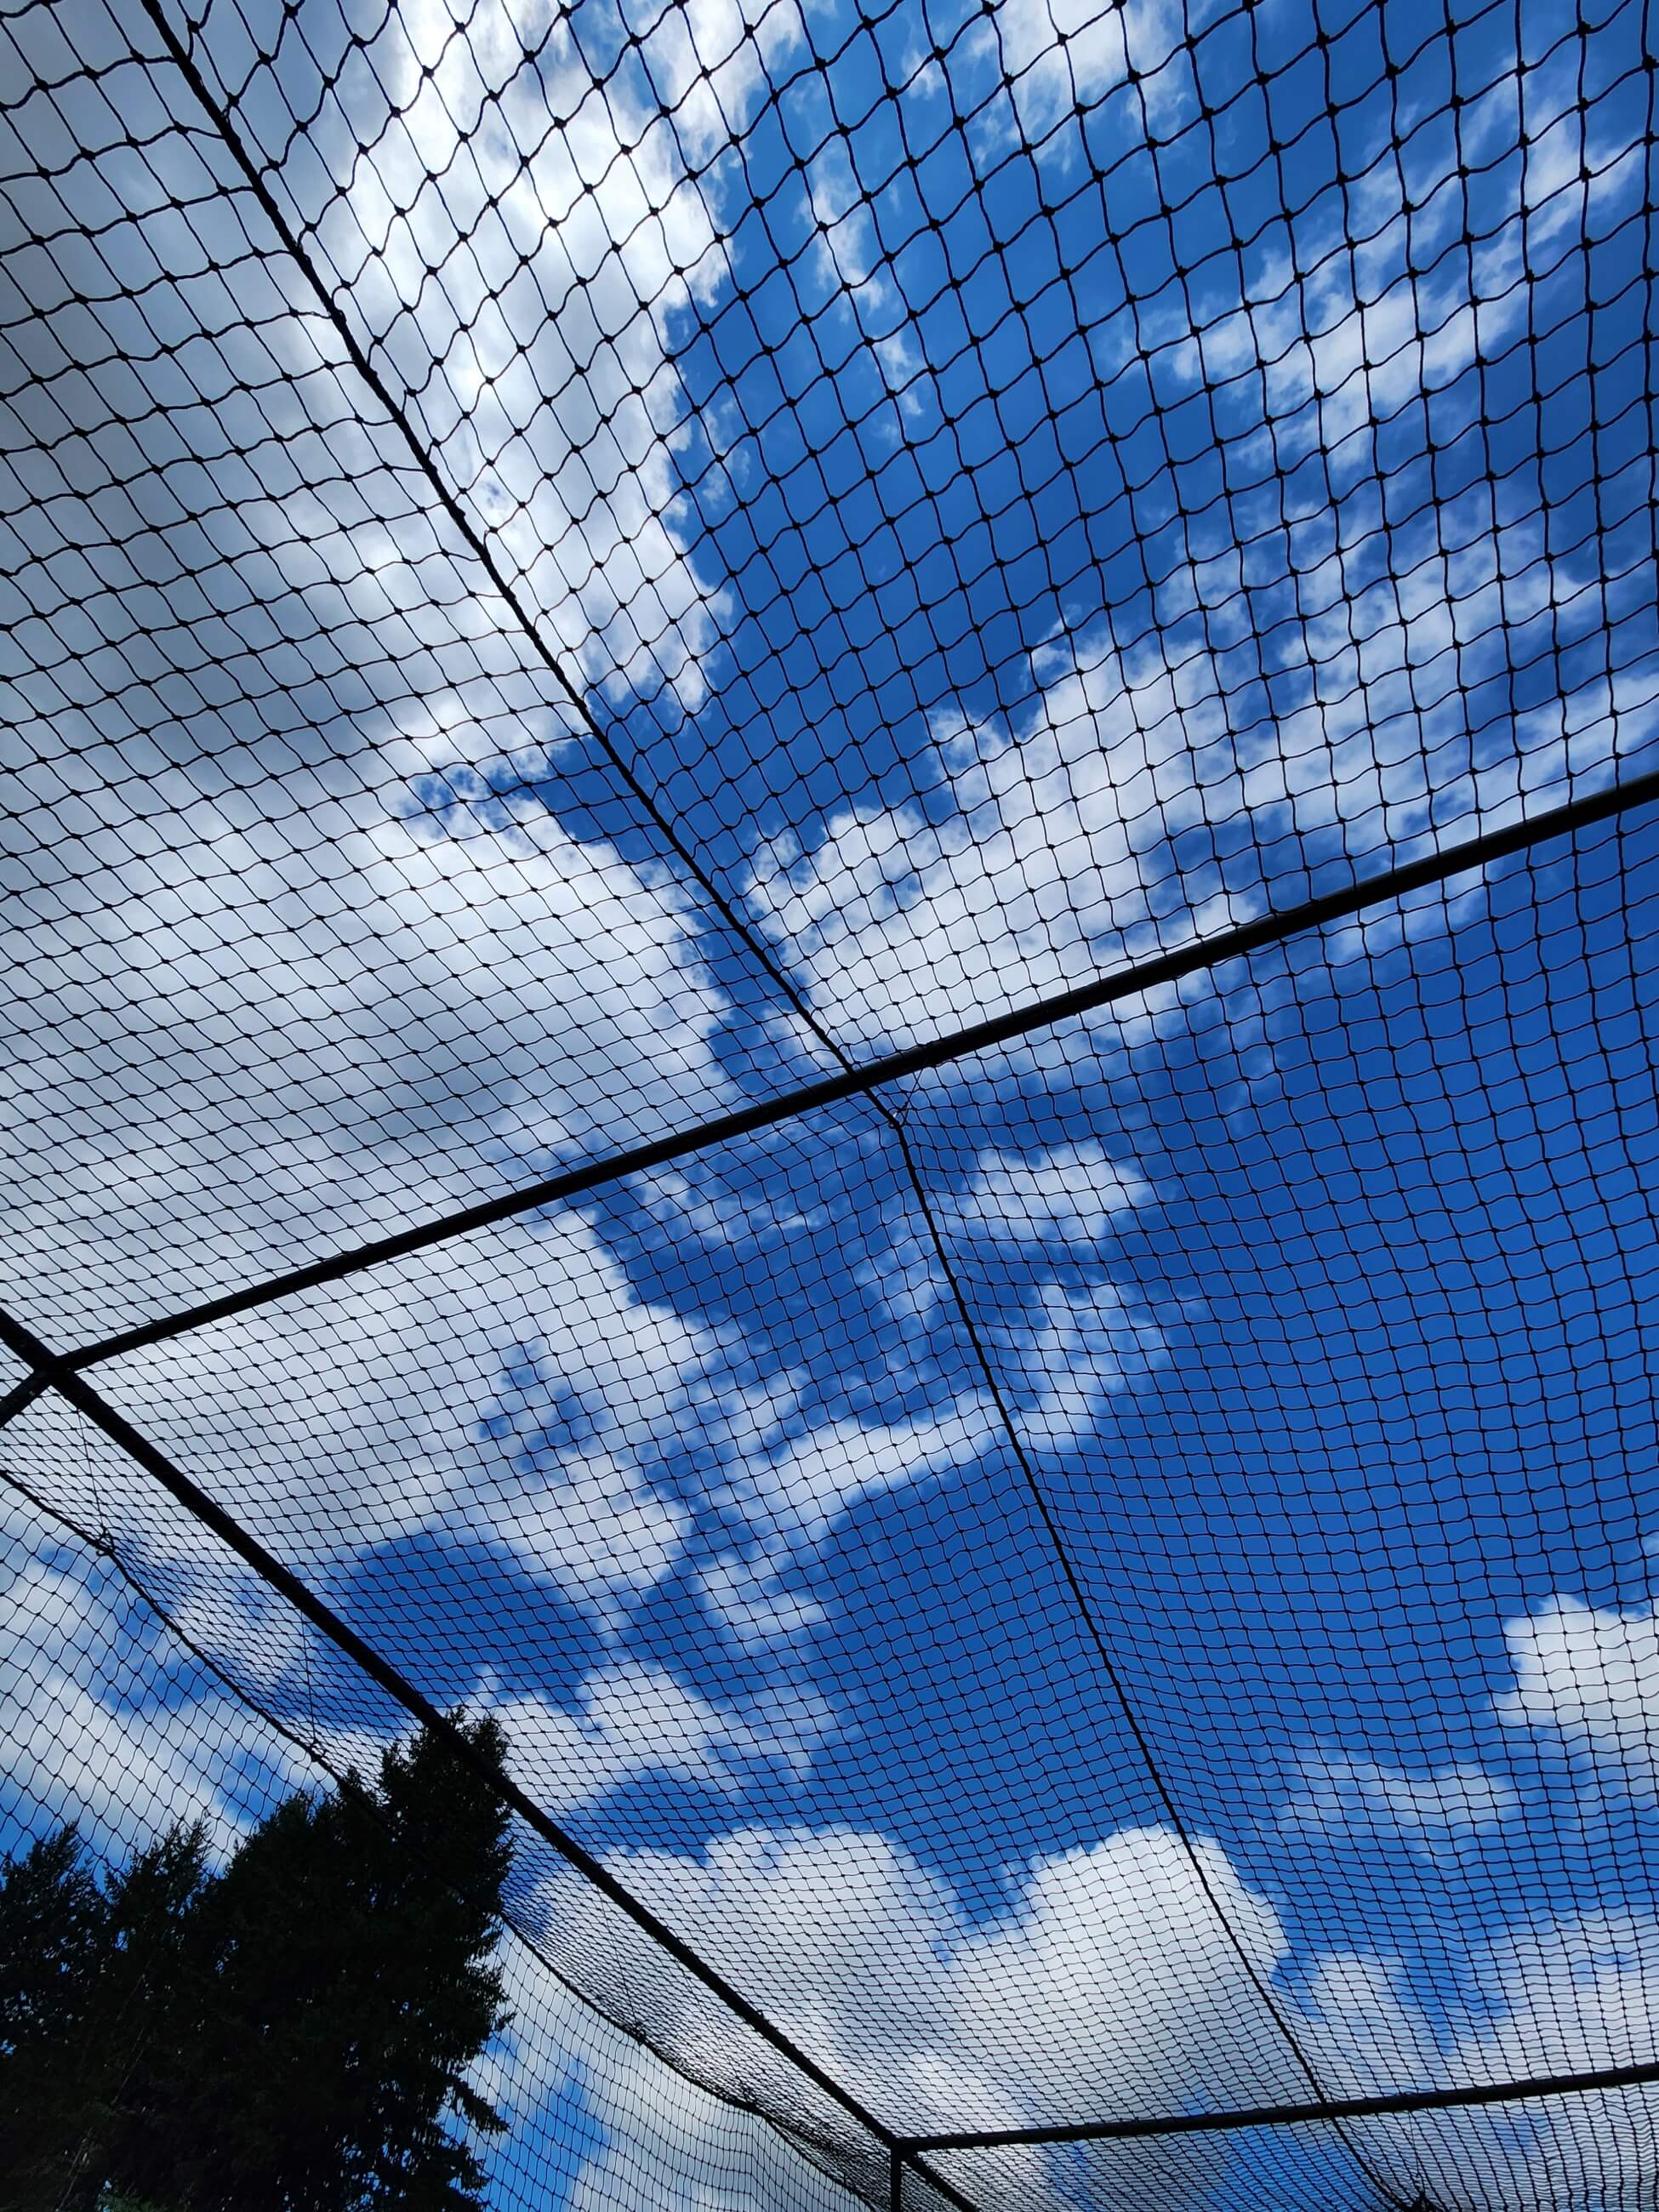 Inside view of the batting cage net clipped and hung from the frame